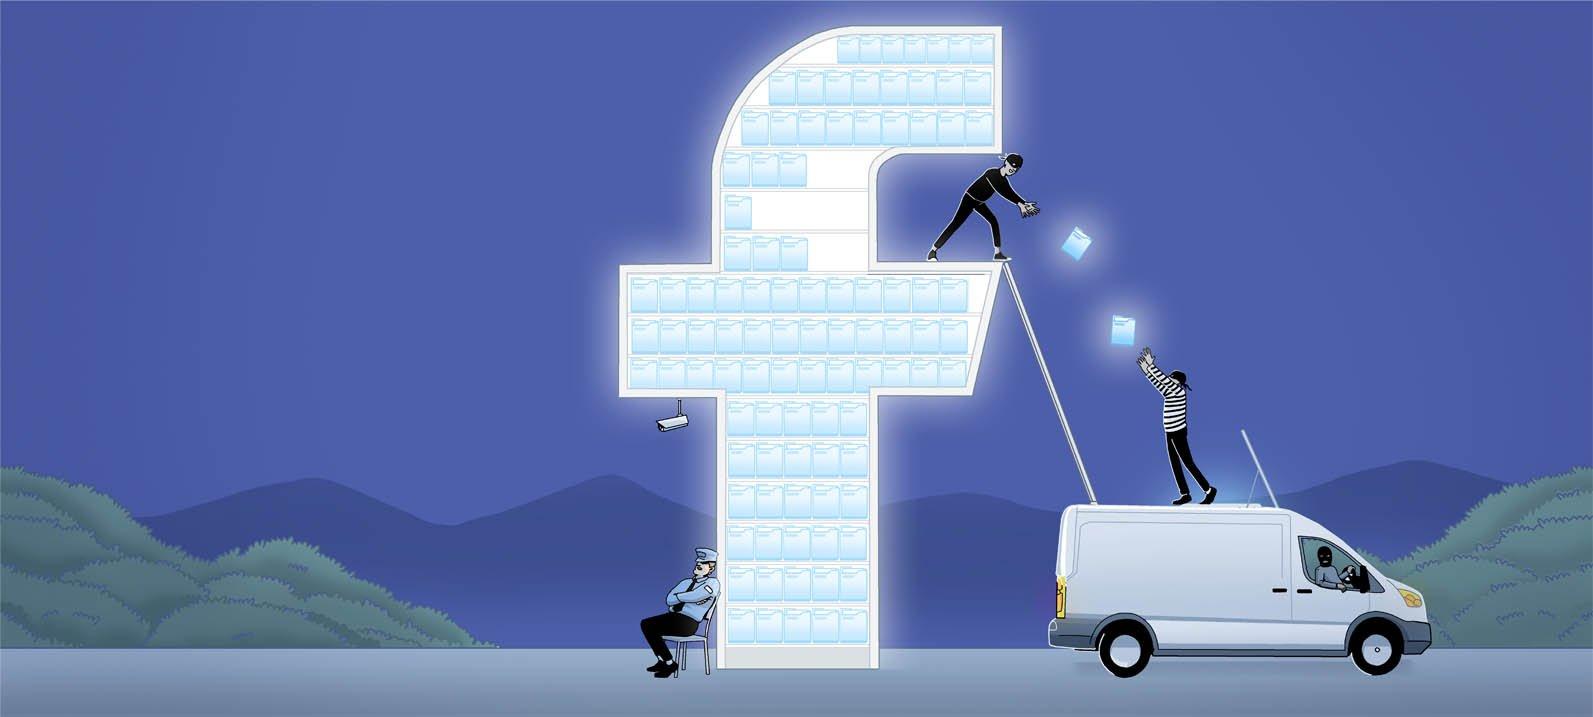 Illustration of  masked thieves stealing data from the Facebook logo